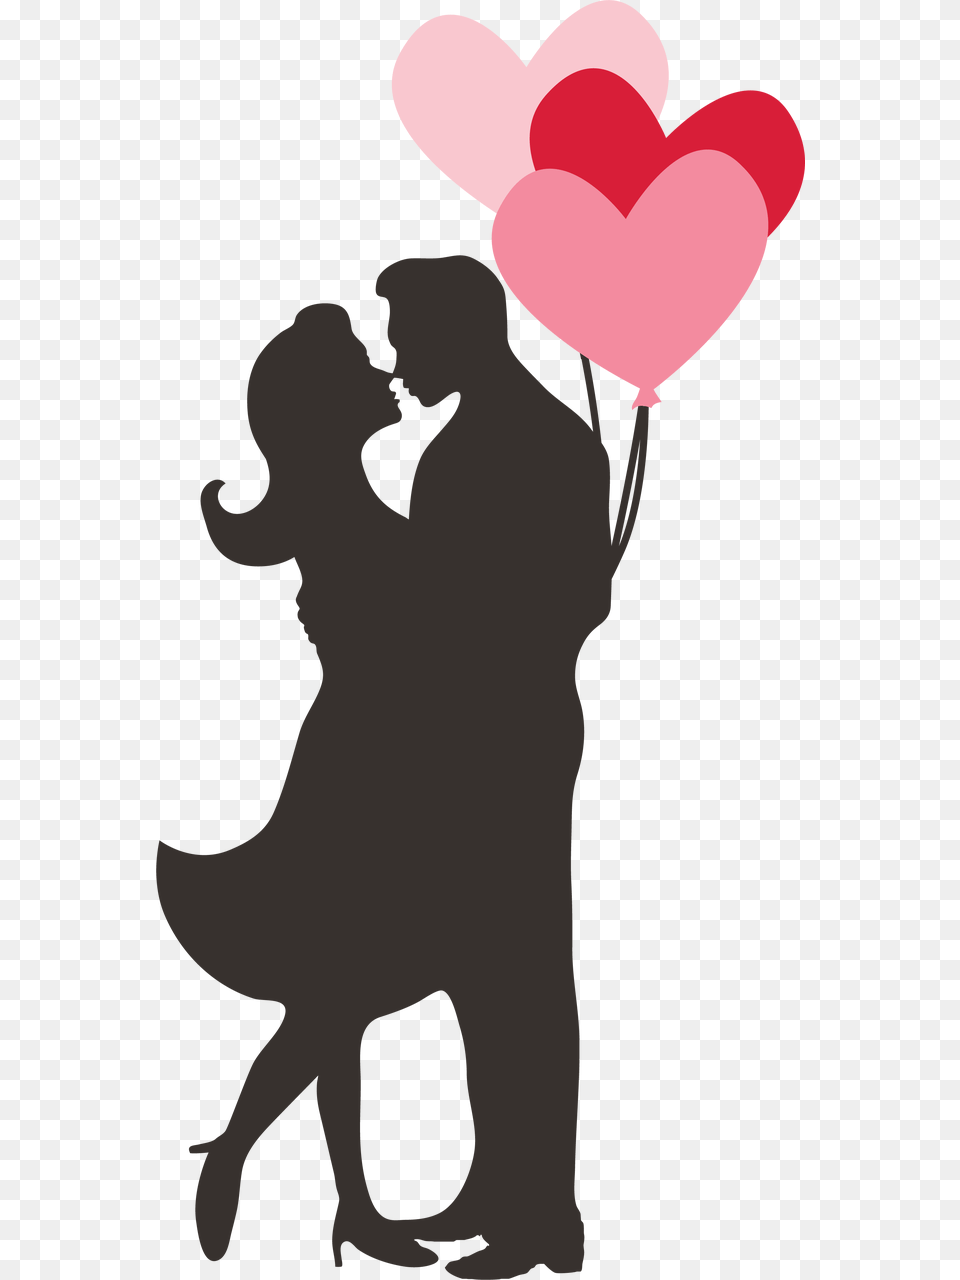 Couple Silhouette Svg Cut File Couple With Balloons Silhouette, Baby, Person, Heart, Romantic Free Png Download